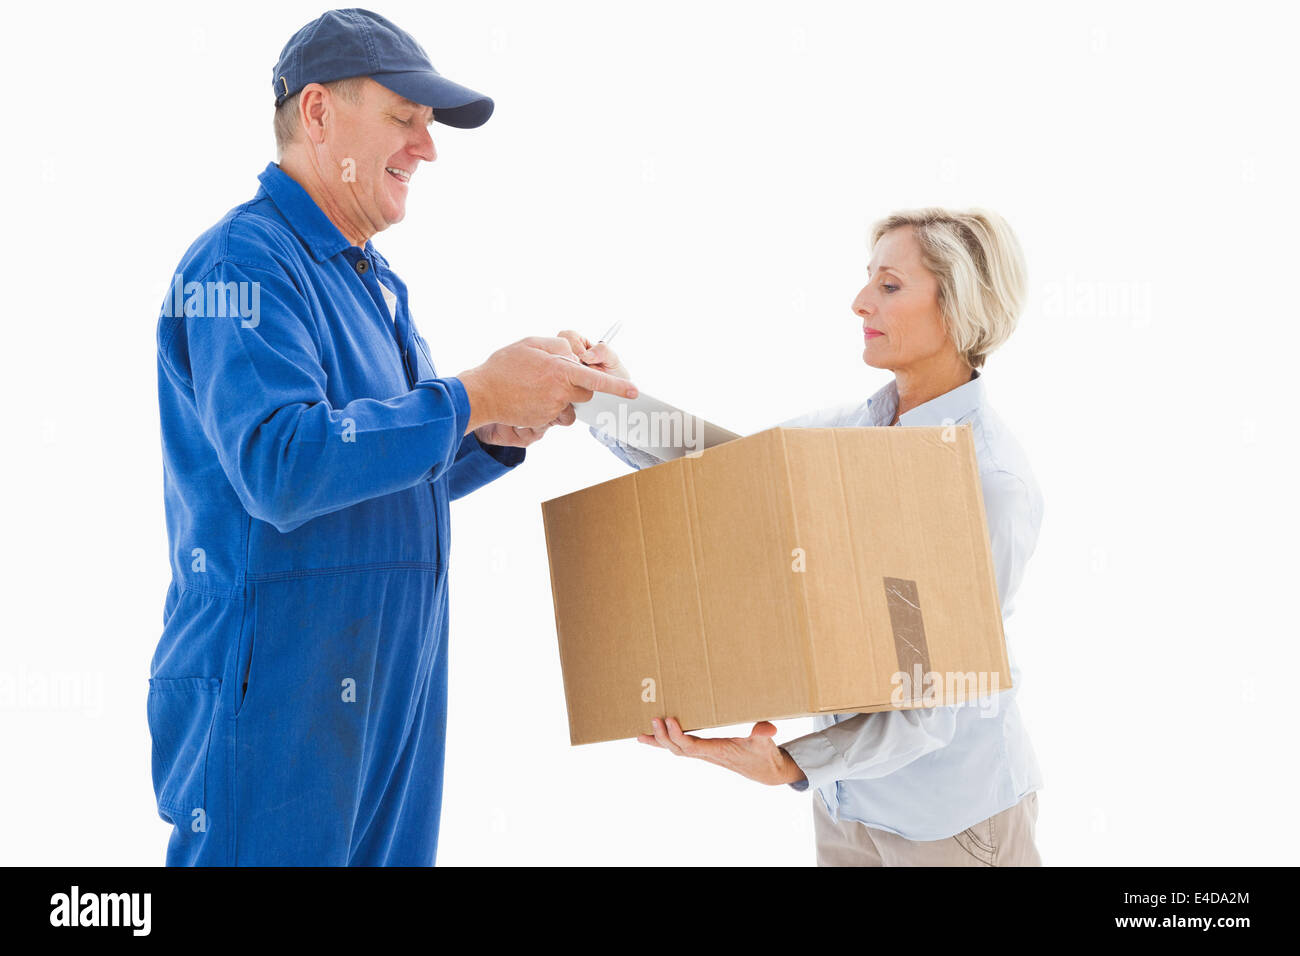 Happy delivery man with customer Stock Photo